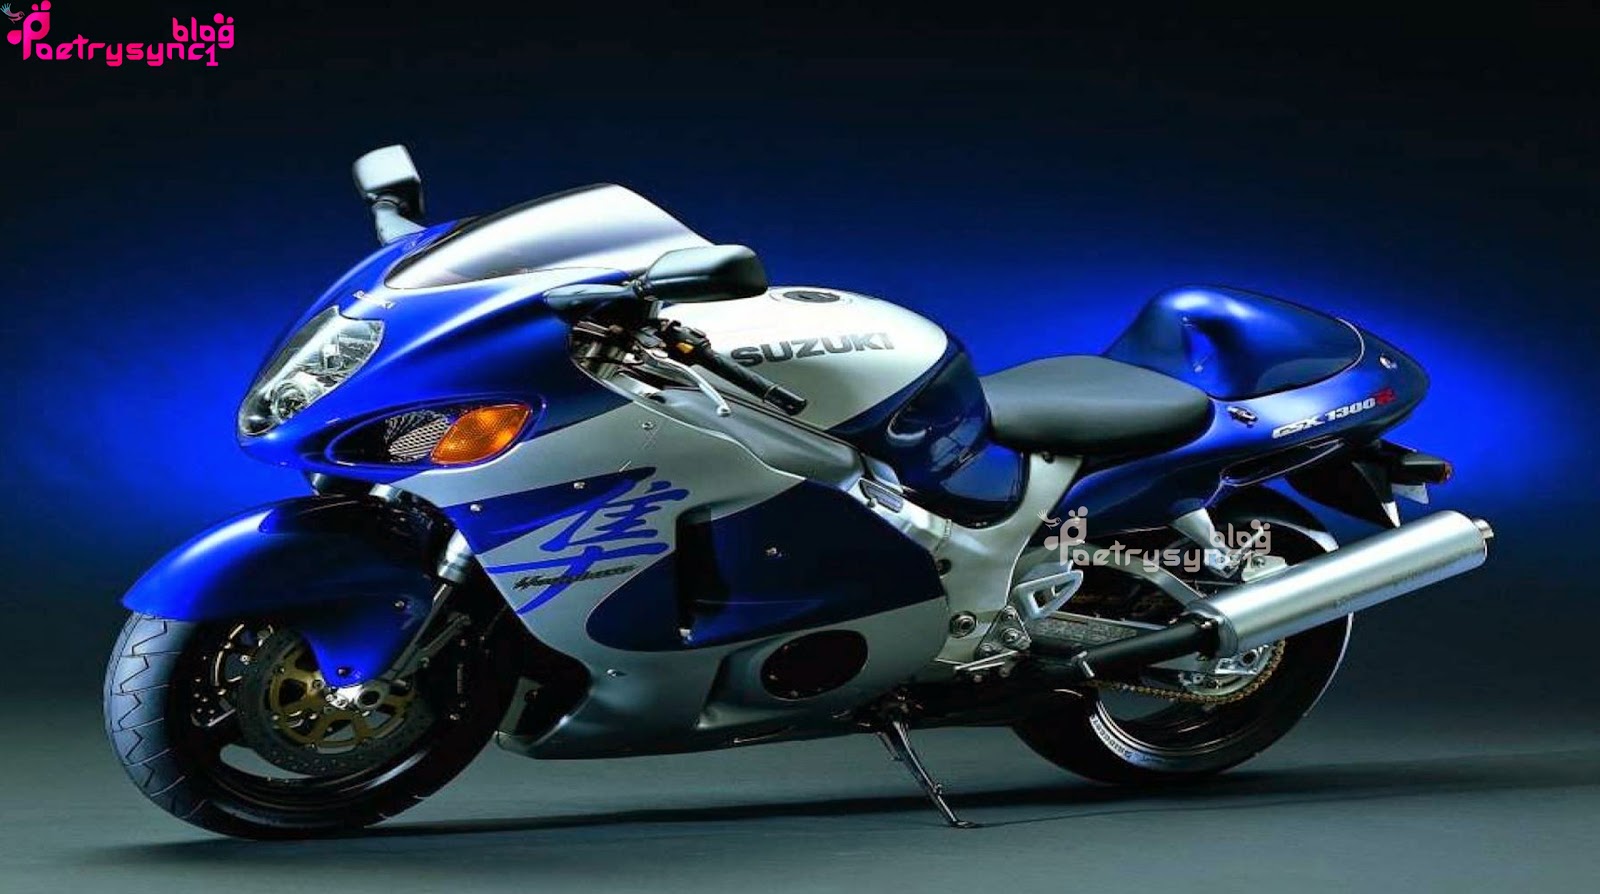 Bikes-2015-HD-New-Model-Blue-Image-Wide-By-Poetrysync1.blog